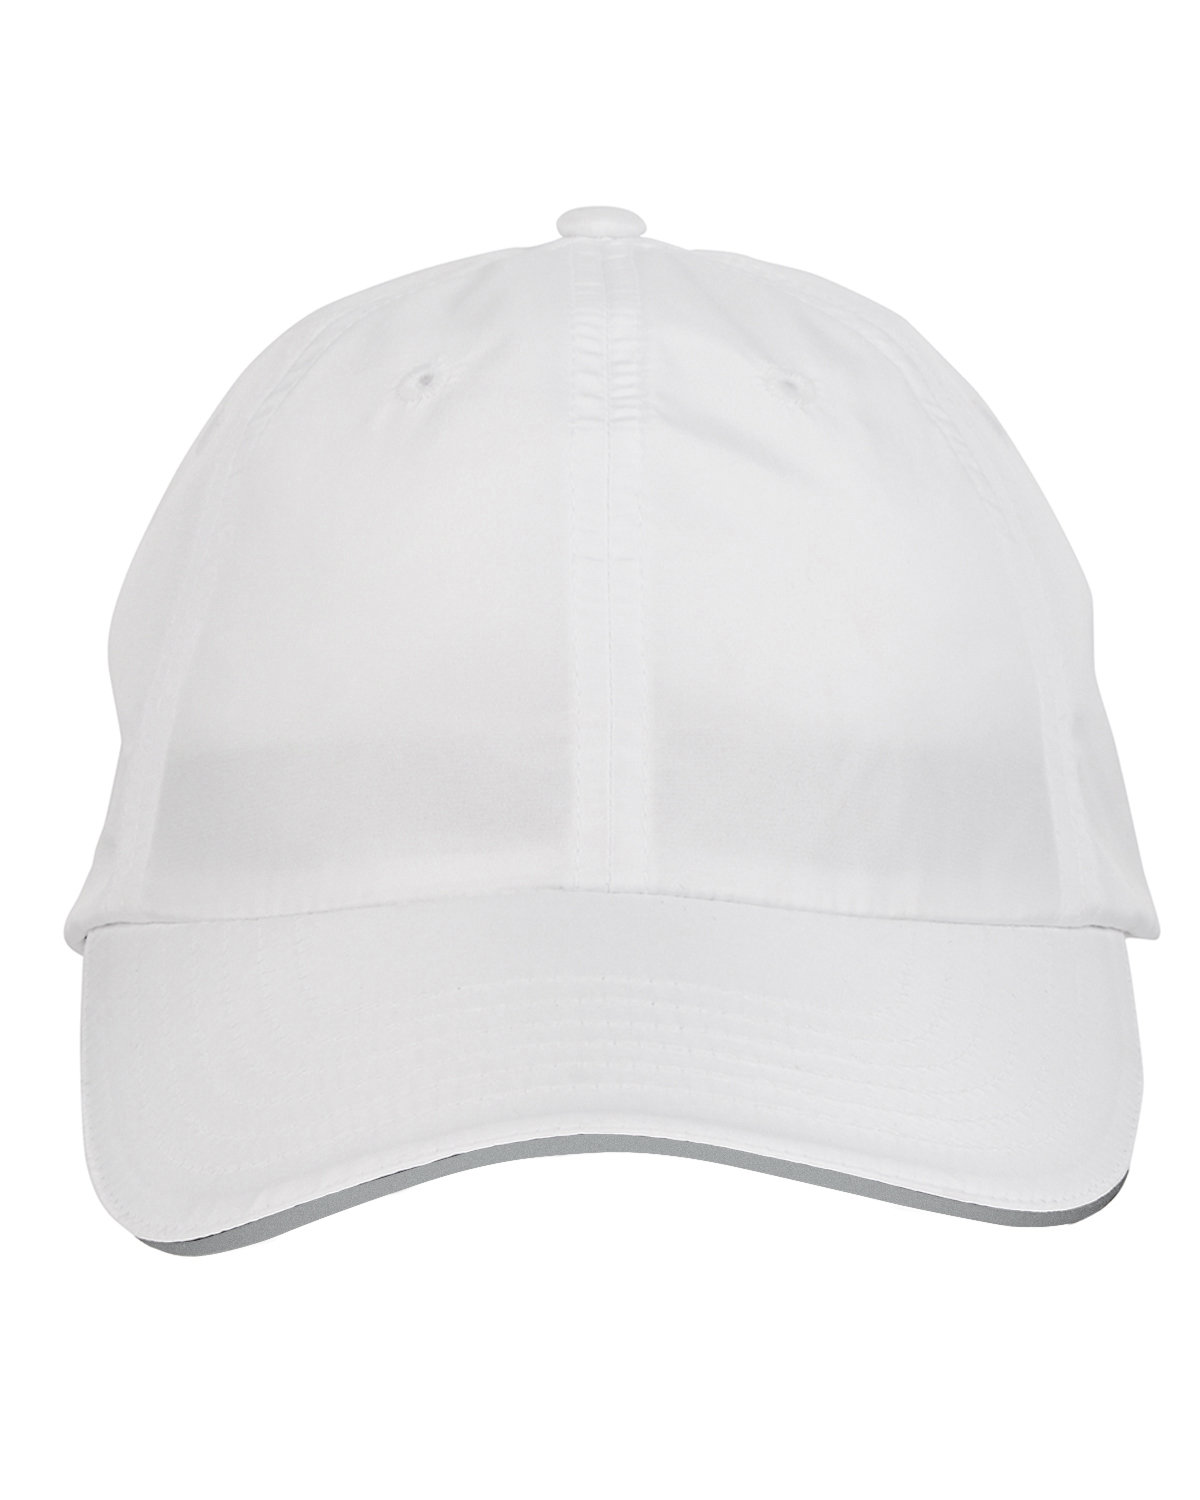 Core365 Adult Pitch Performance Cap WHITE 